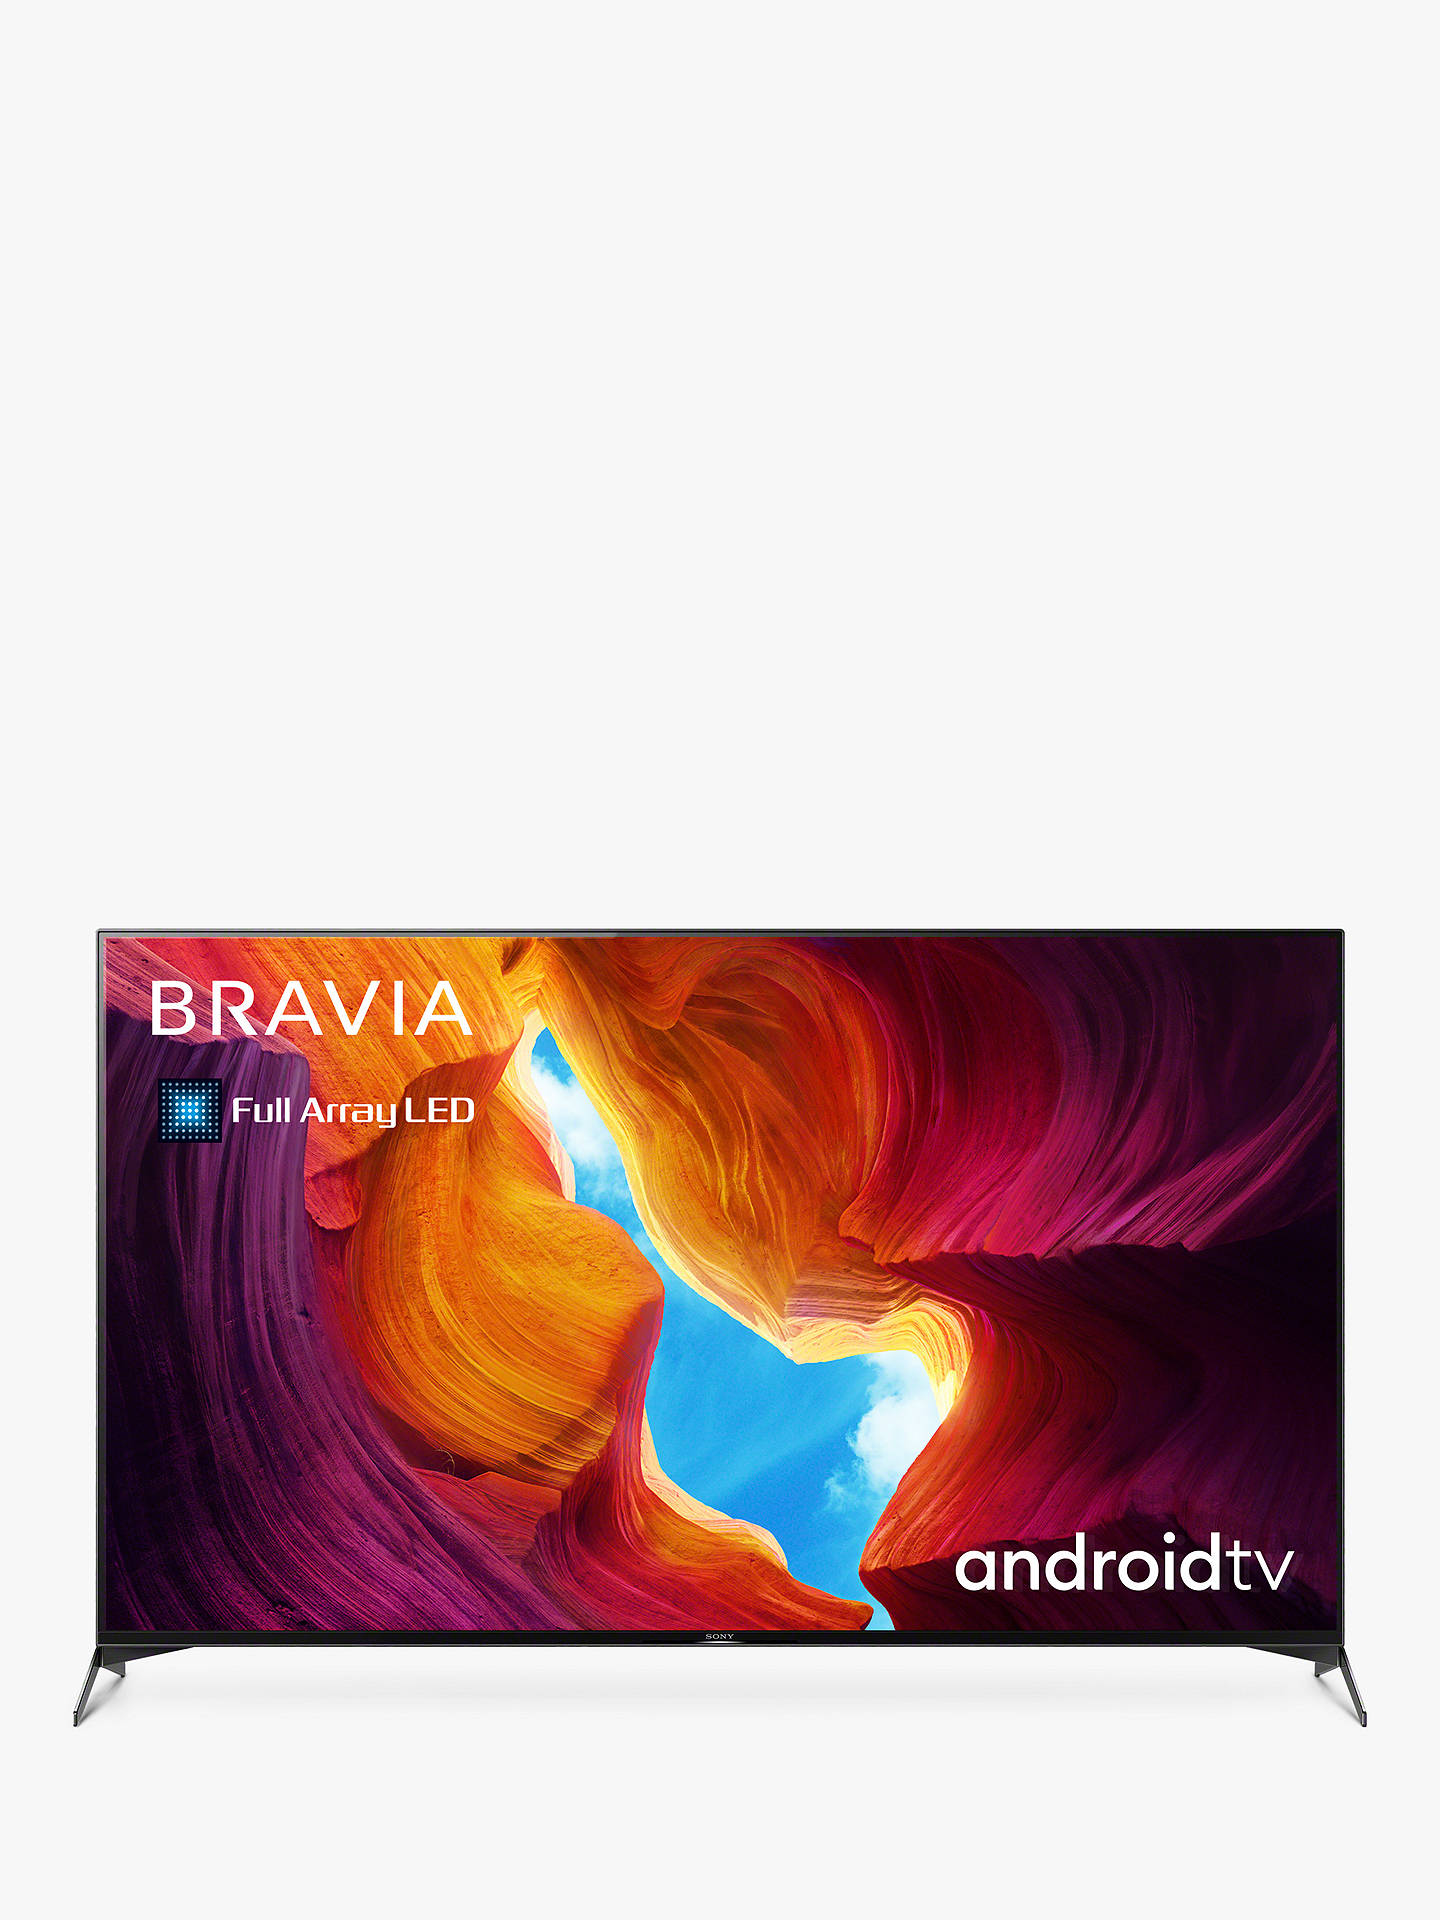 Sony Bravia KD75XH9505 (2020) LED HDR 4K Ultra HD Smart Android TV, 75 inch with Freeview HD ...